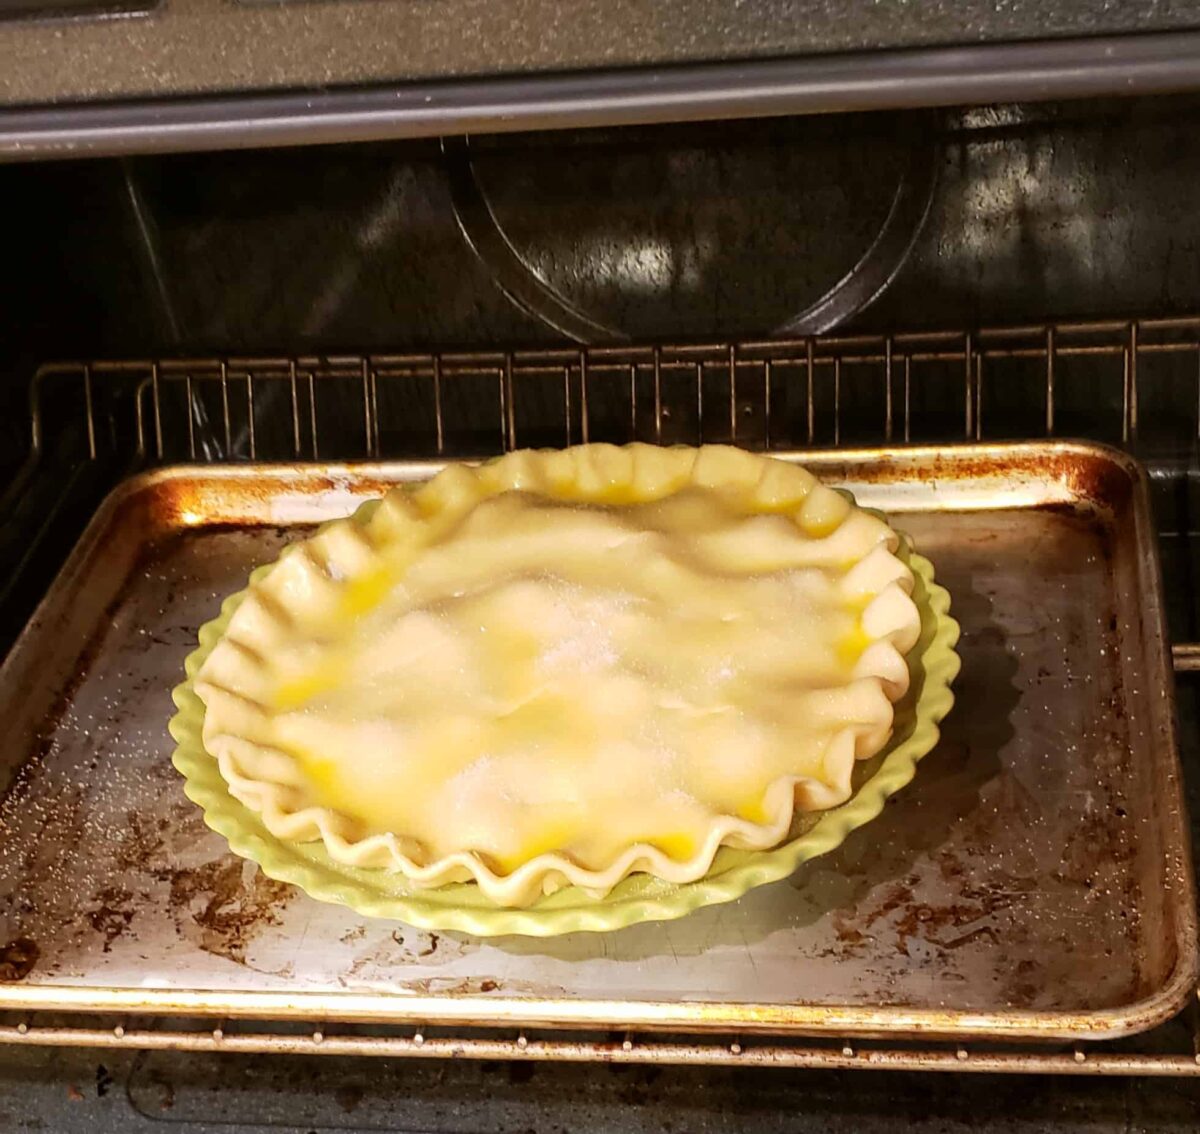 Pie on a baking sheet in oven before baking